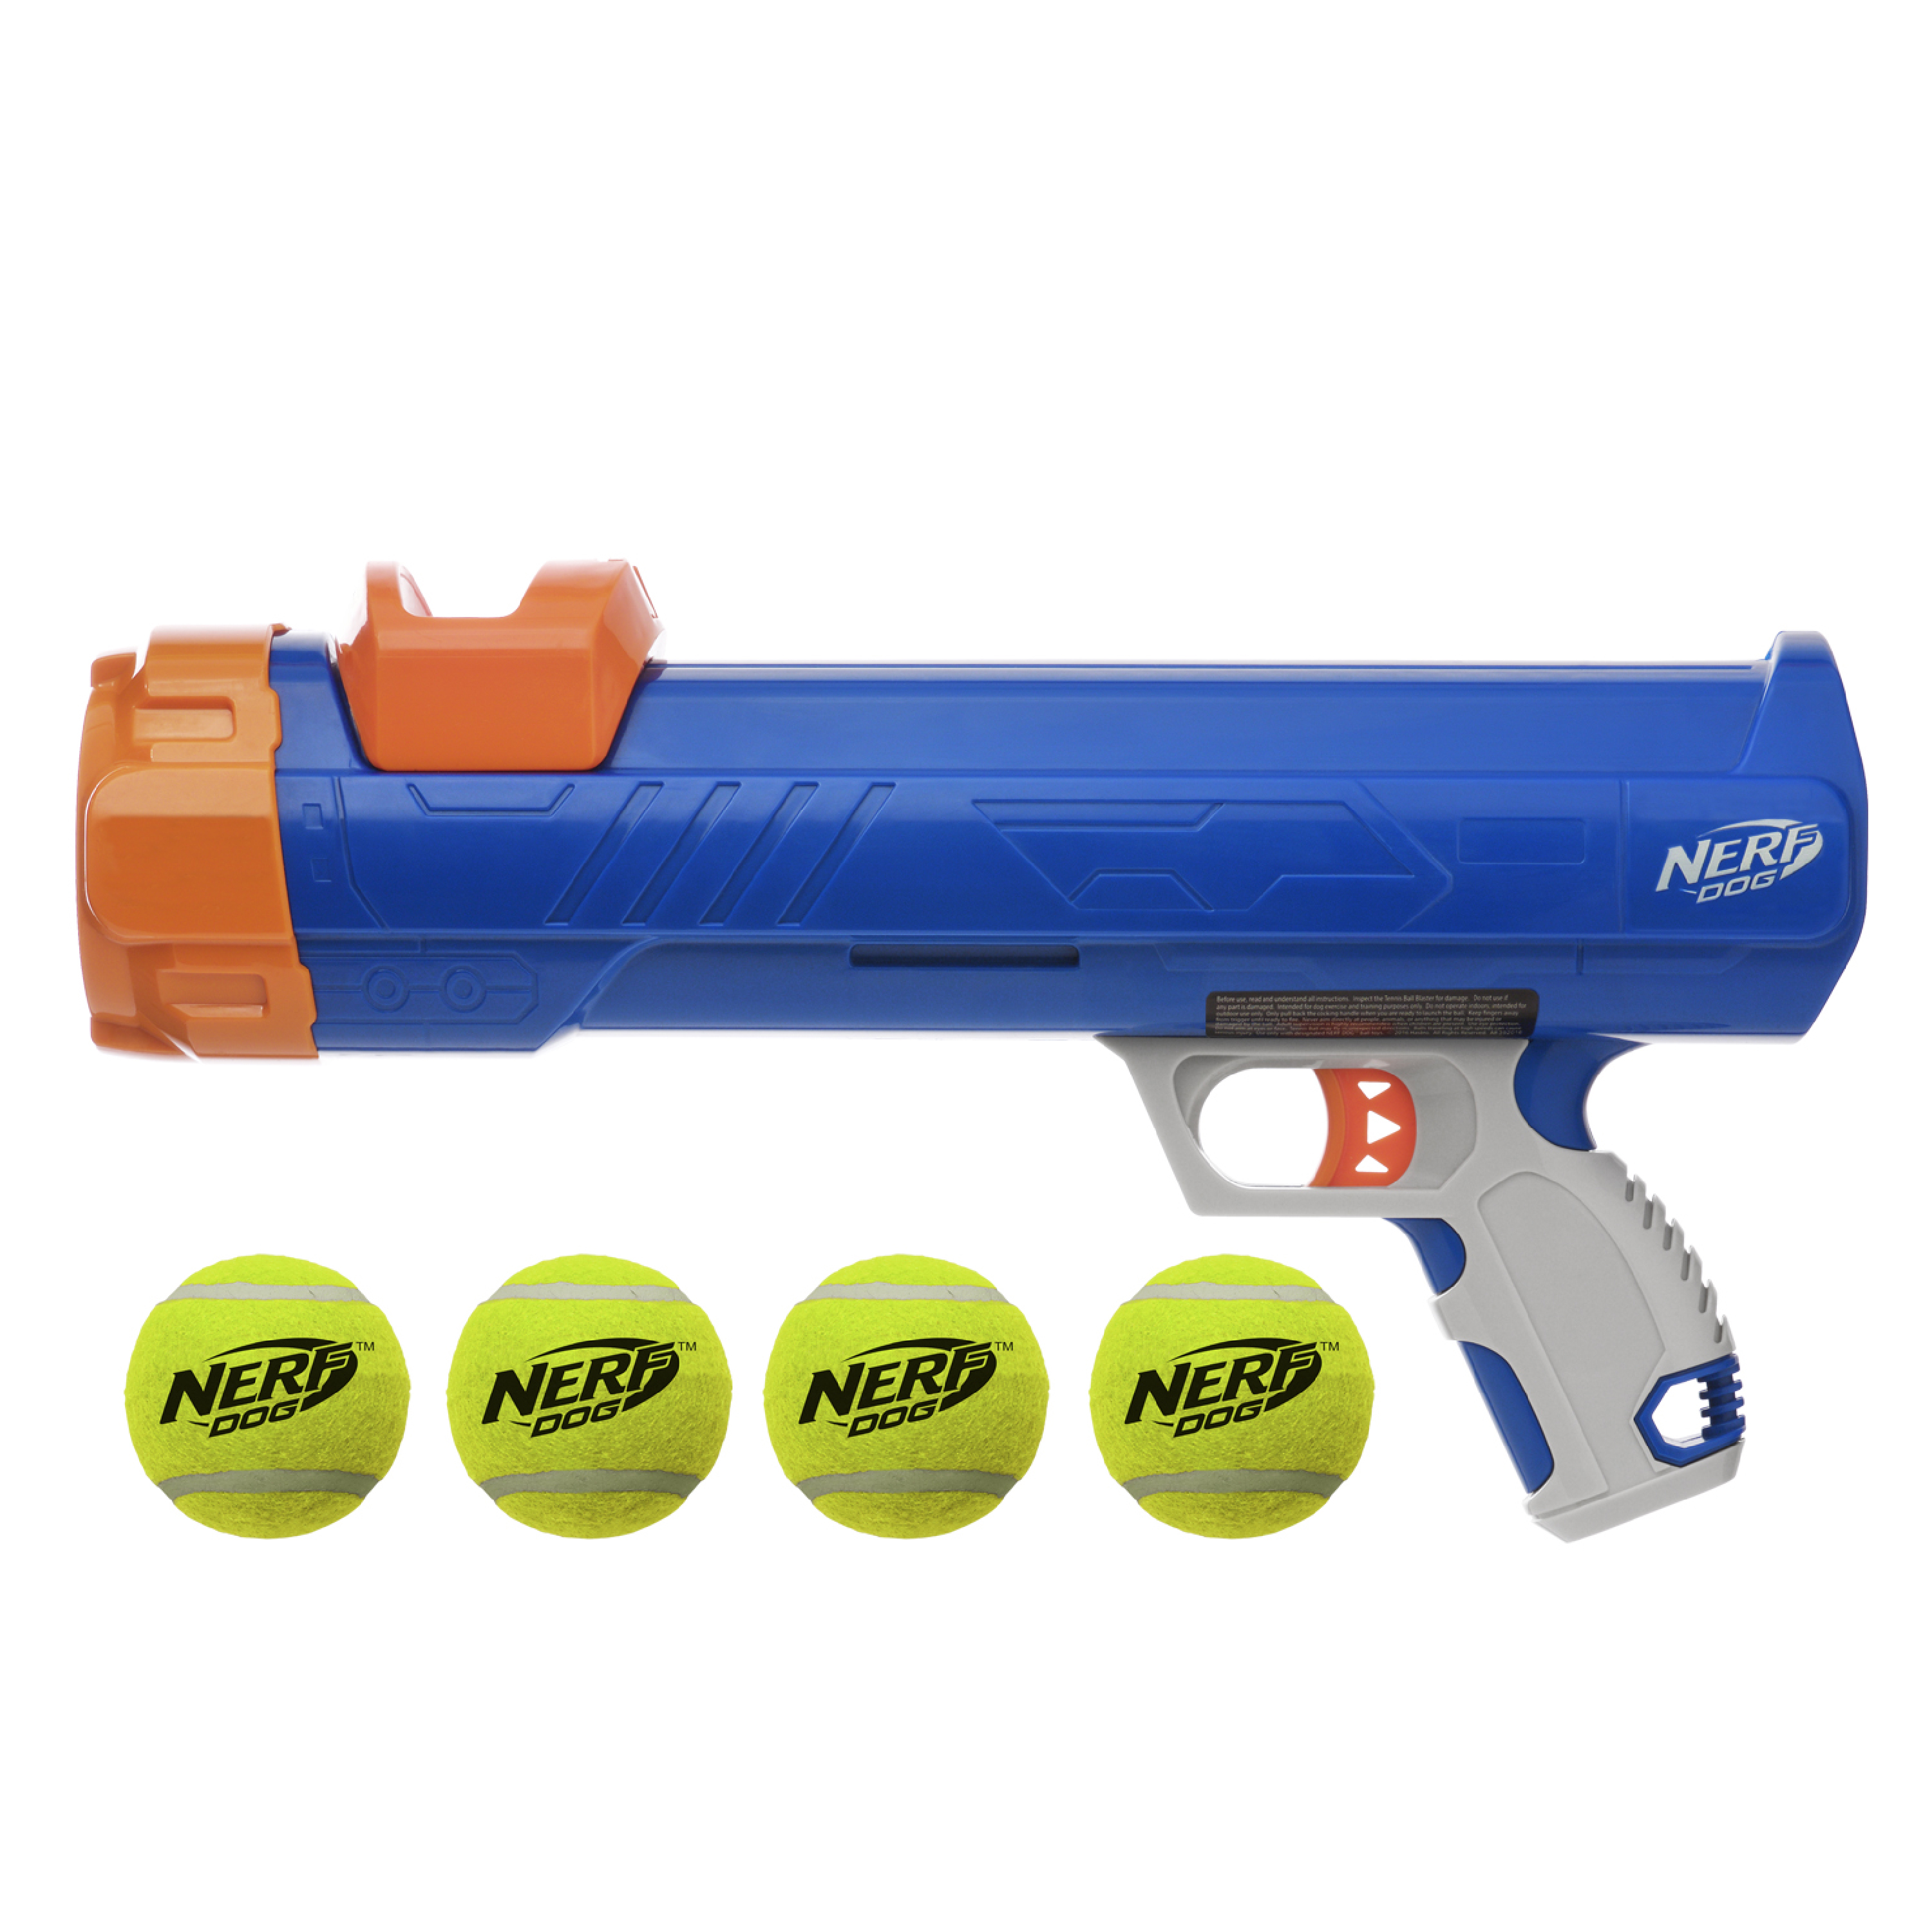 Nerf Dog 16” Tennis Ball Blaster Dog Toy with 4 Balls - image 8 of 8